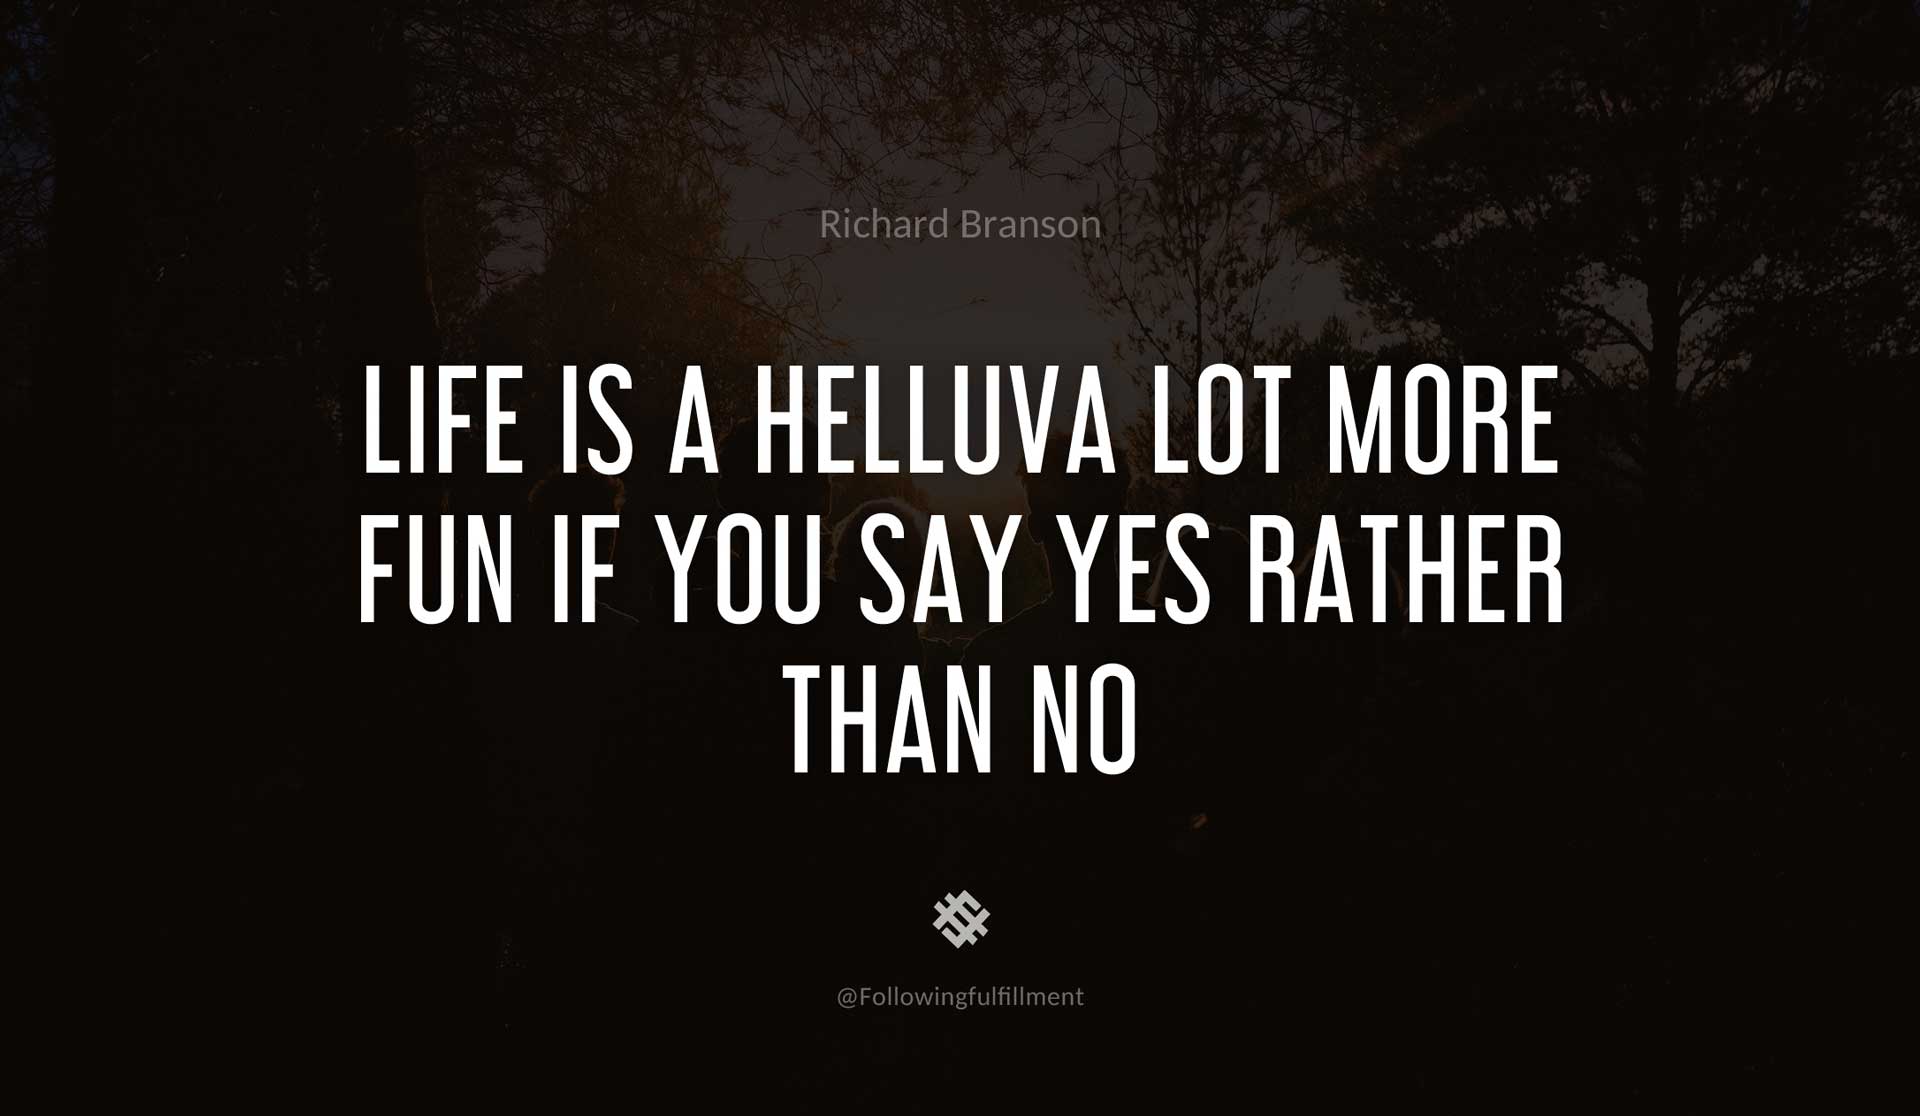 Life-is-a-helluva-lot-more-fun-if-you-say-yes-rather-than-no-RICHARD-BRANSON-Quote.jpg